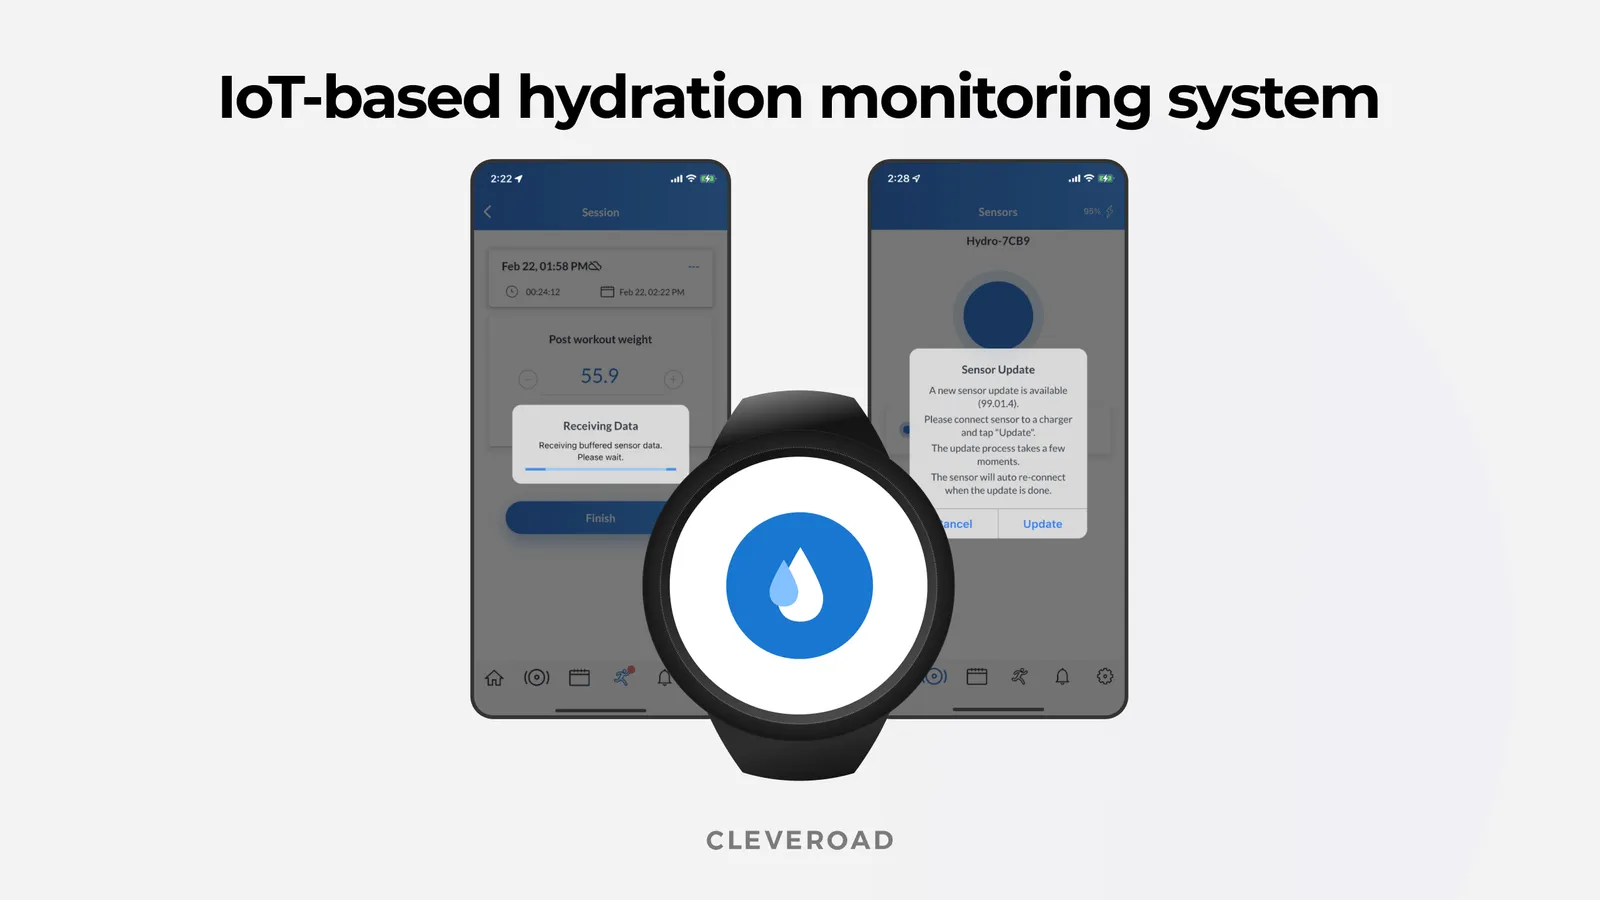 IoT-based hydration monitoring system